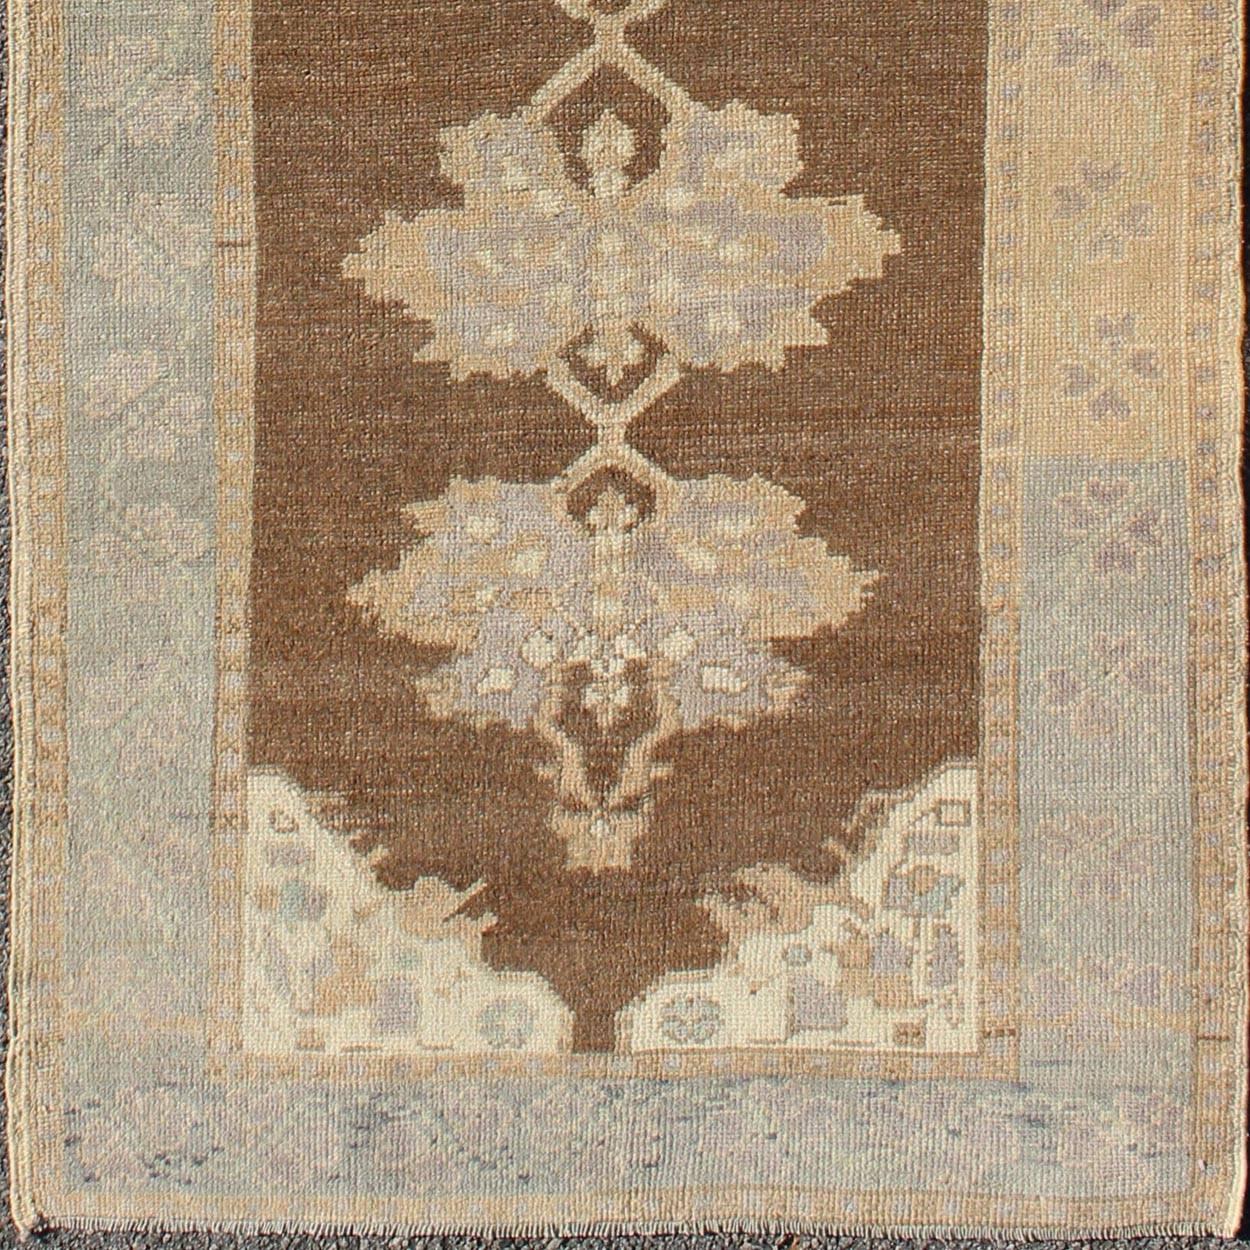 Brown-tone blossom Medallion design Oushak vintage Turkish runner, rug tu-ugu-3342, country of origin / type: Turkey / Oushak, circa 1940

This beautiful vintage Oushak runner from 1940s Turkey features a Classic Oushak design. The brown ground is